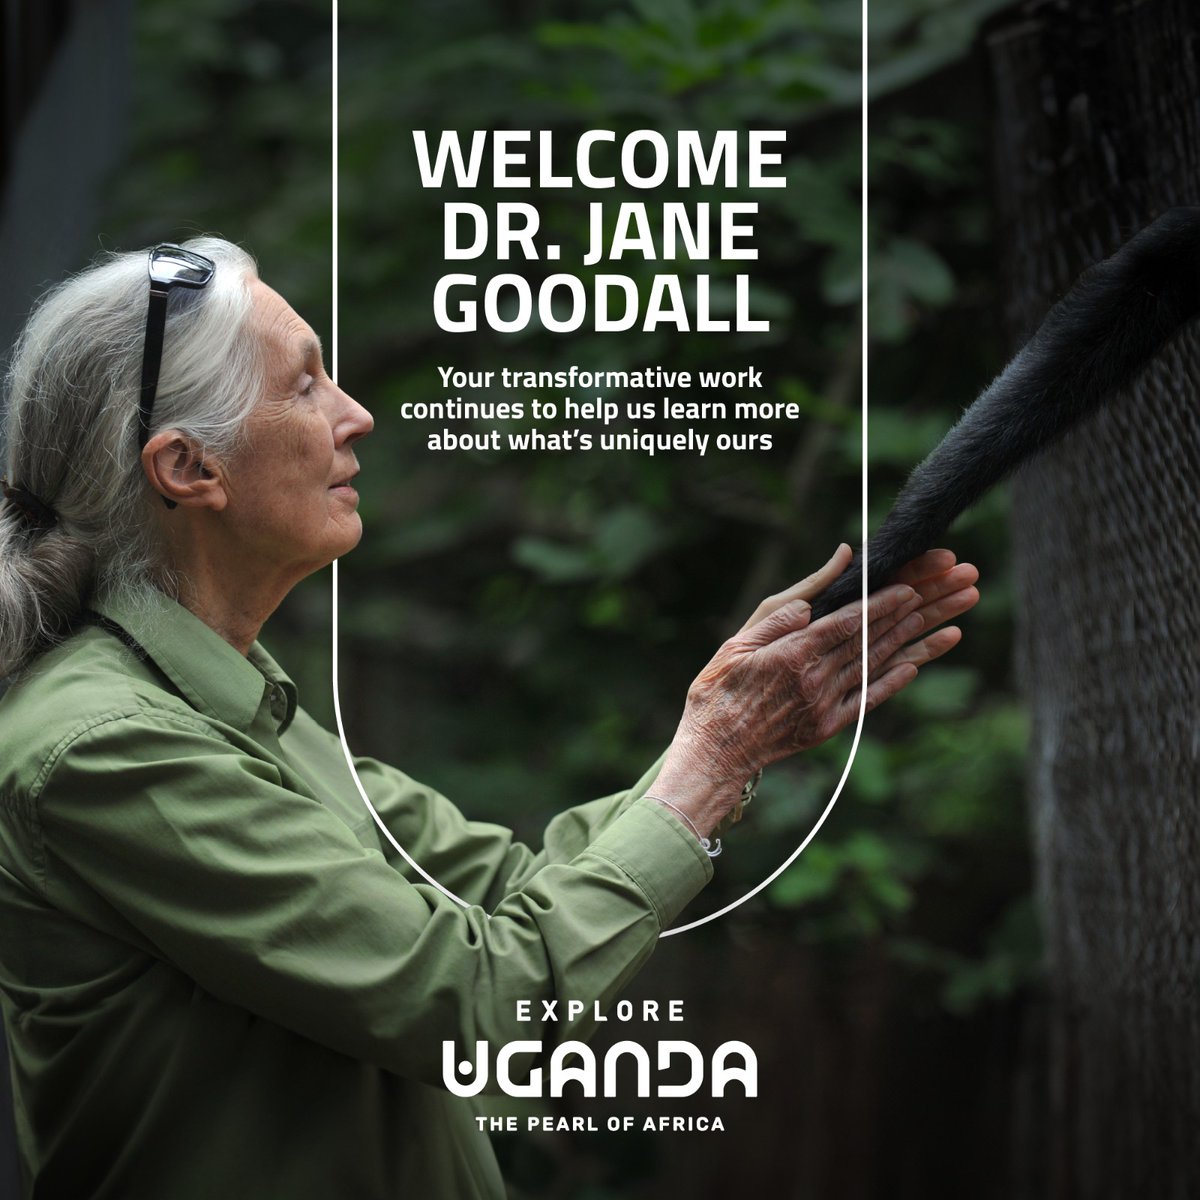 An article in @NatGeo described her as a legendary scientist, conservationist, and humanitarian whose ground breaking discoveries shaped our understanding of what it is to be human. I don't have a better description. Welcome to Uganda @JaneGoodallInst. #ExploreUganda